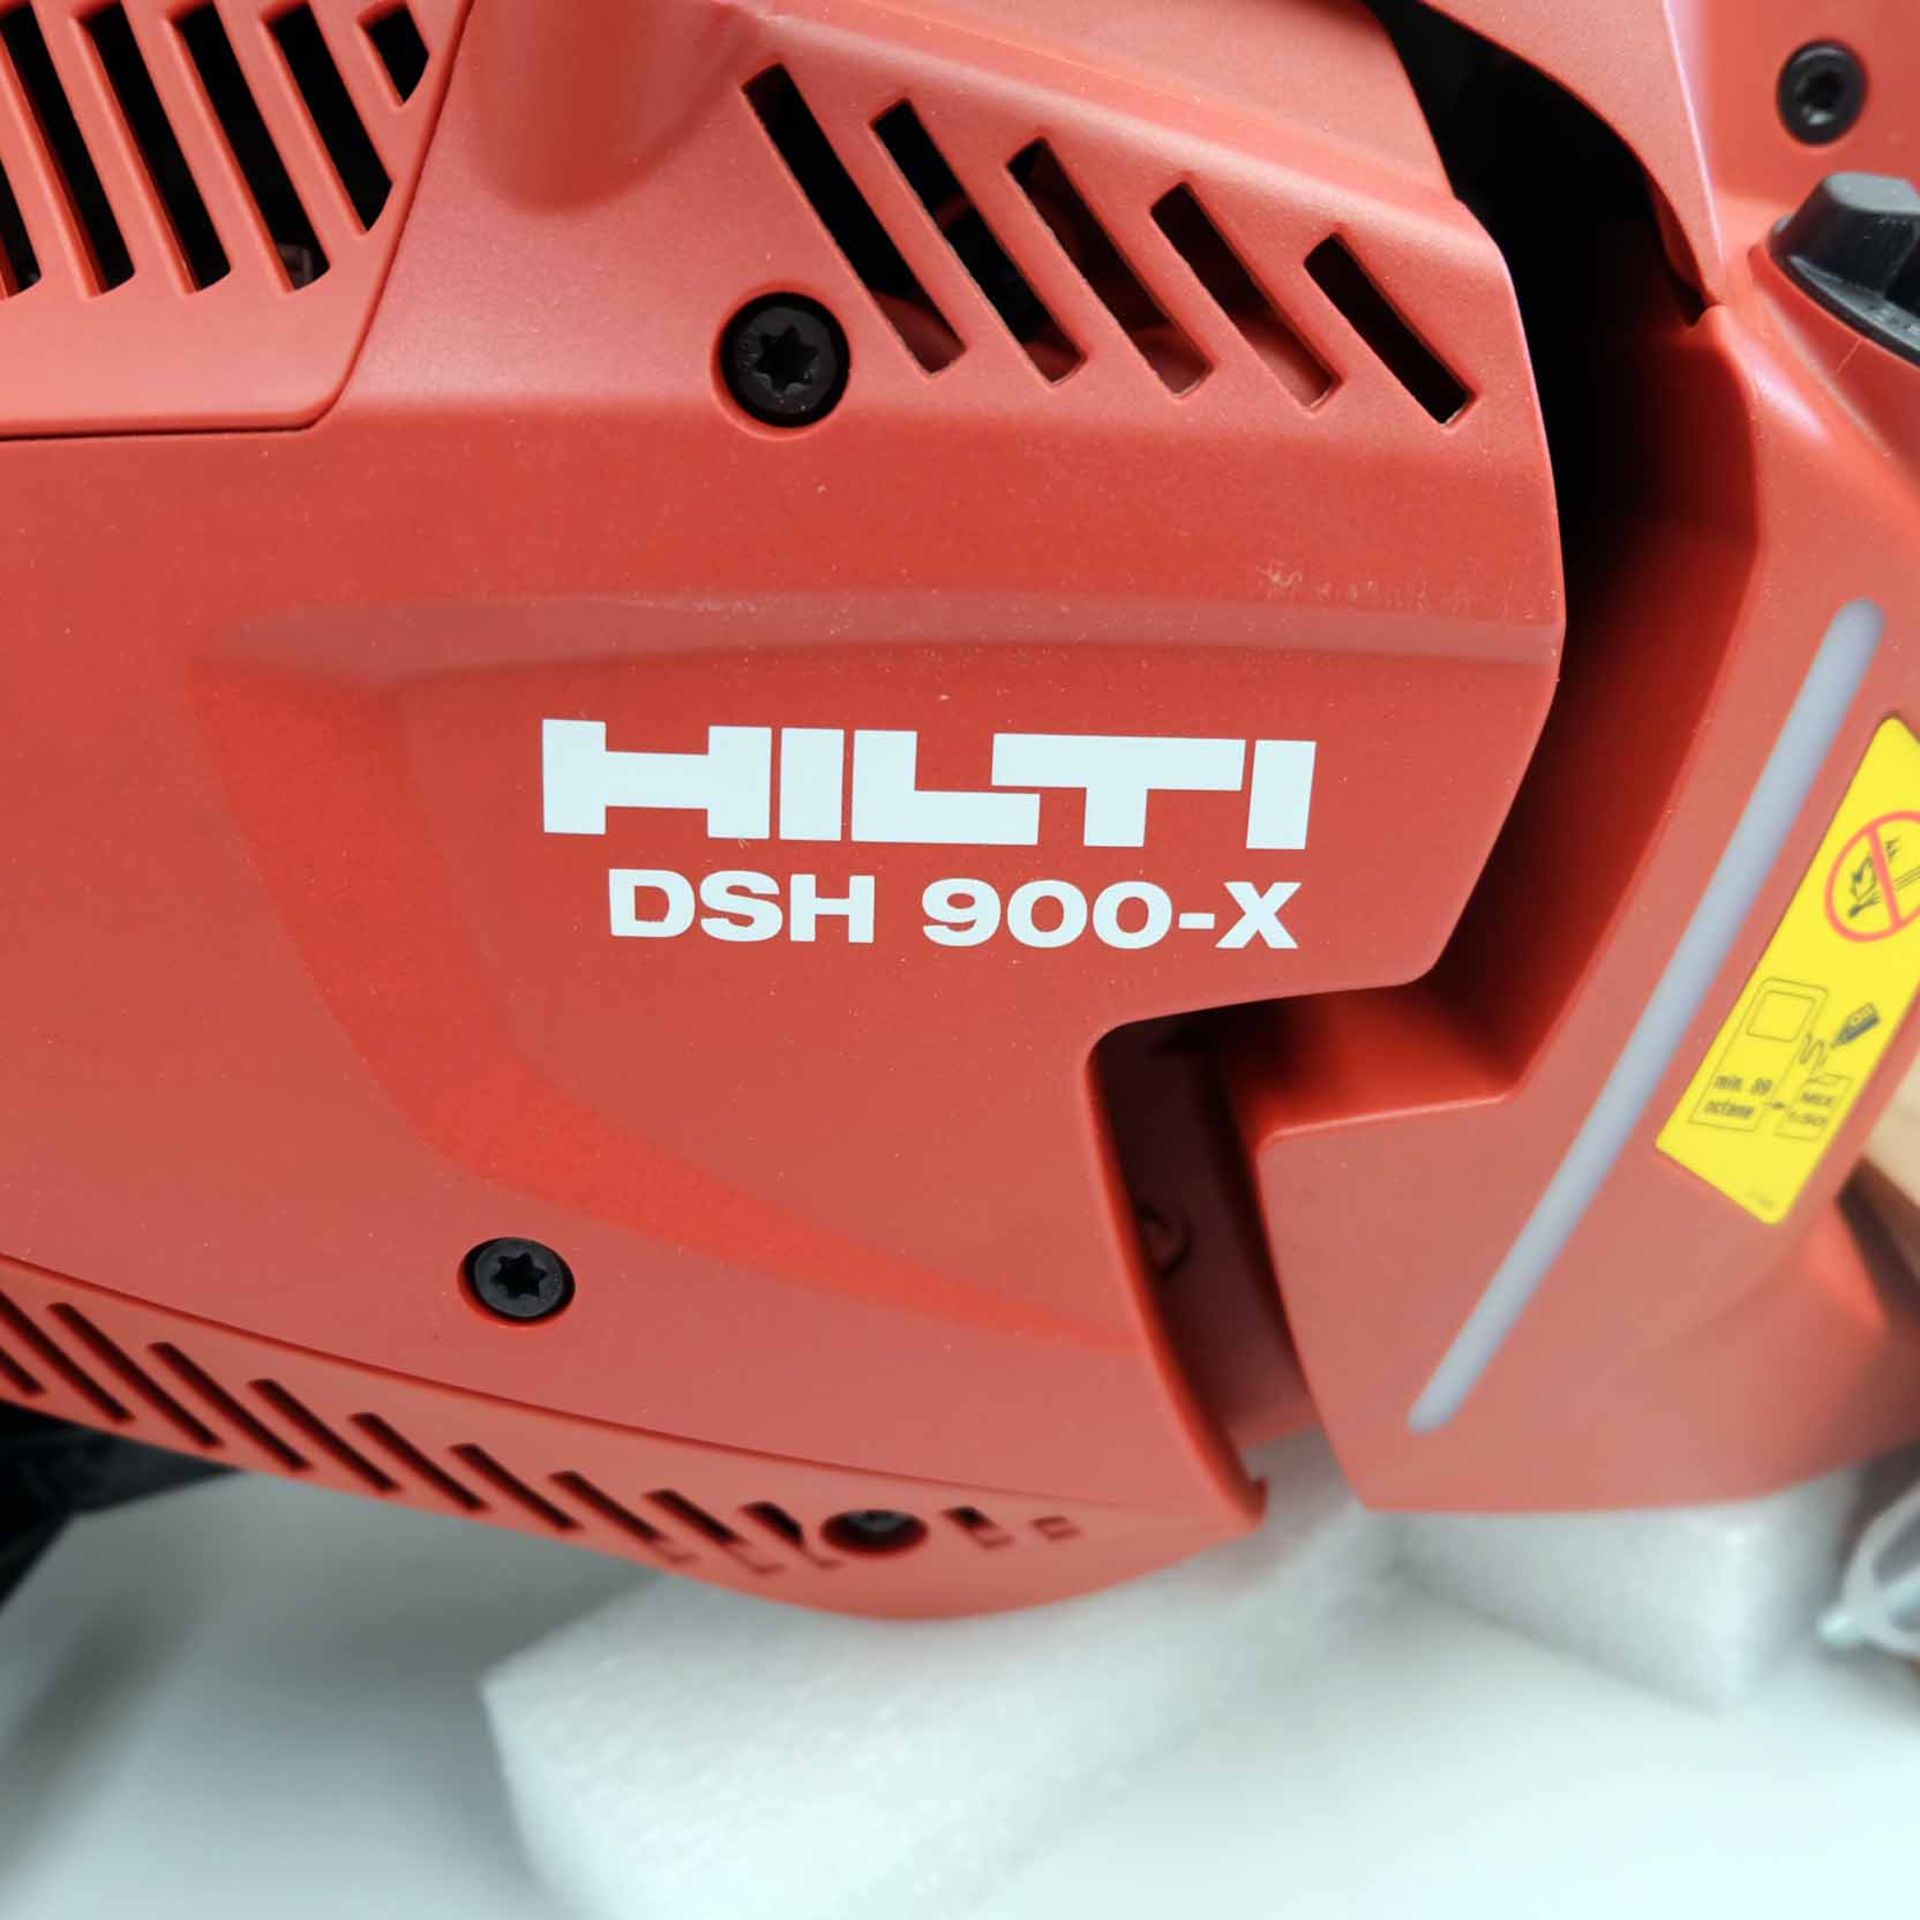 Hilti Hand Held Gas Saw. Model DSH 900-X 16". Complete With SP-16"x1" Blade. Easy Start Auto-Choke S - Image 11 of 22